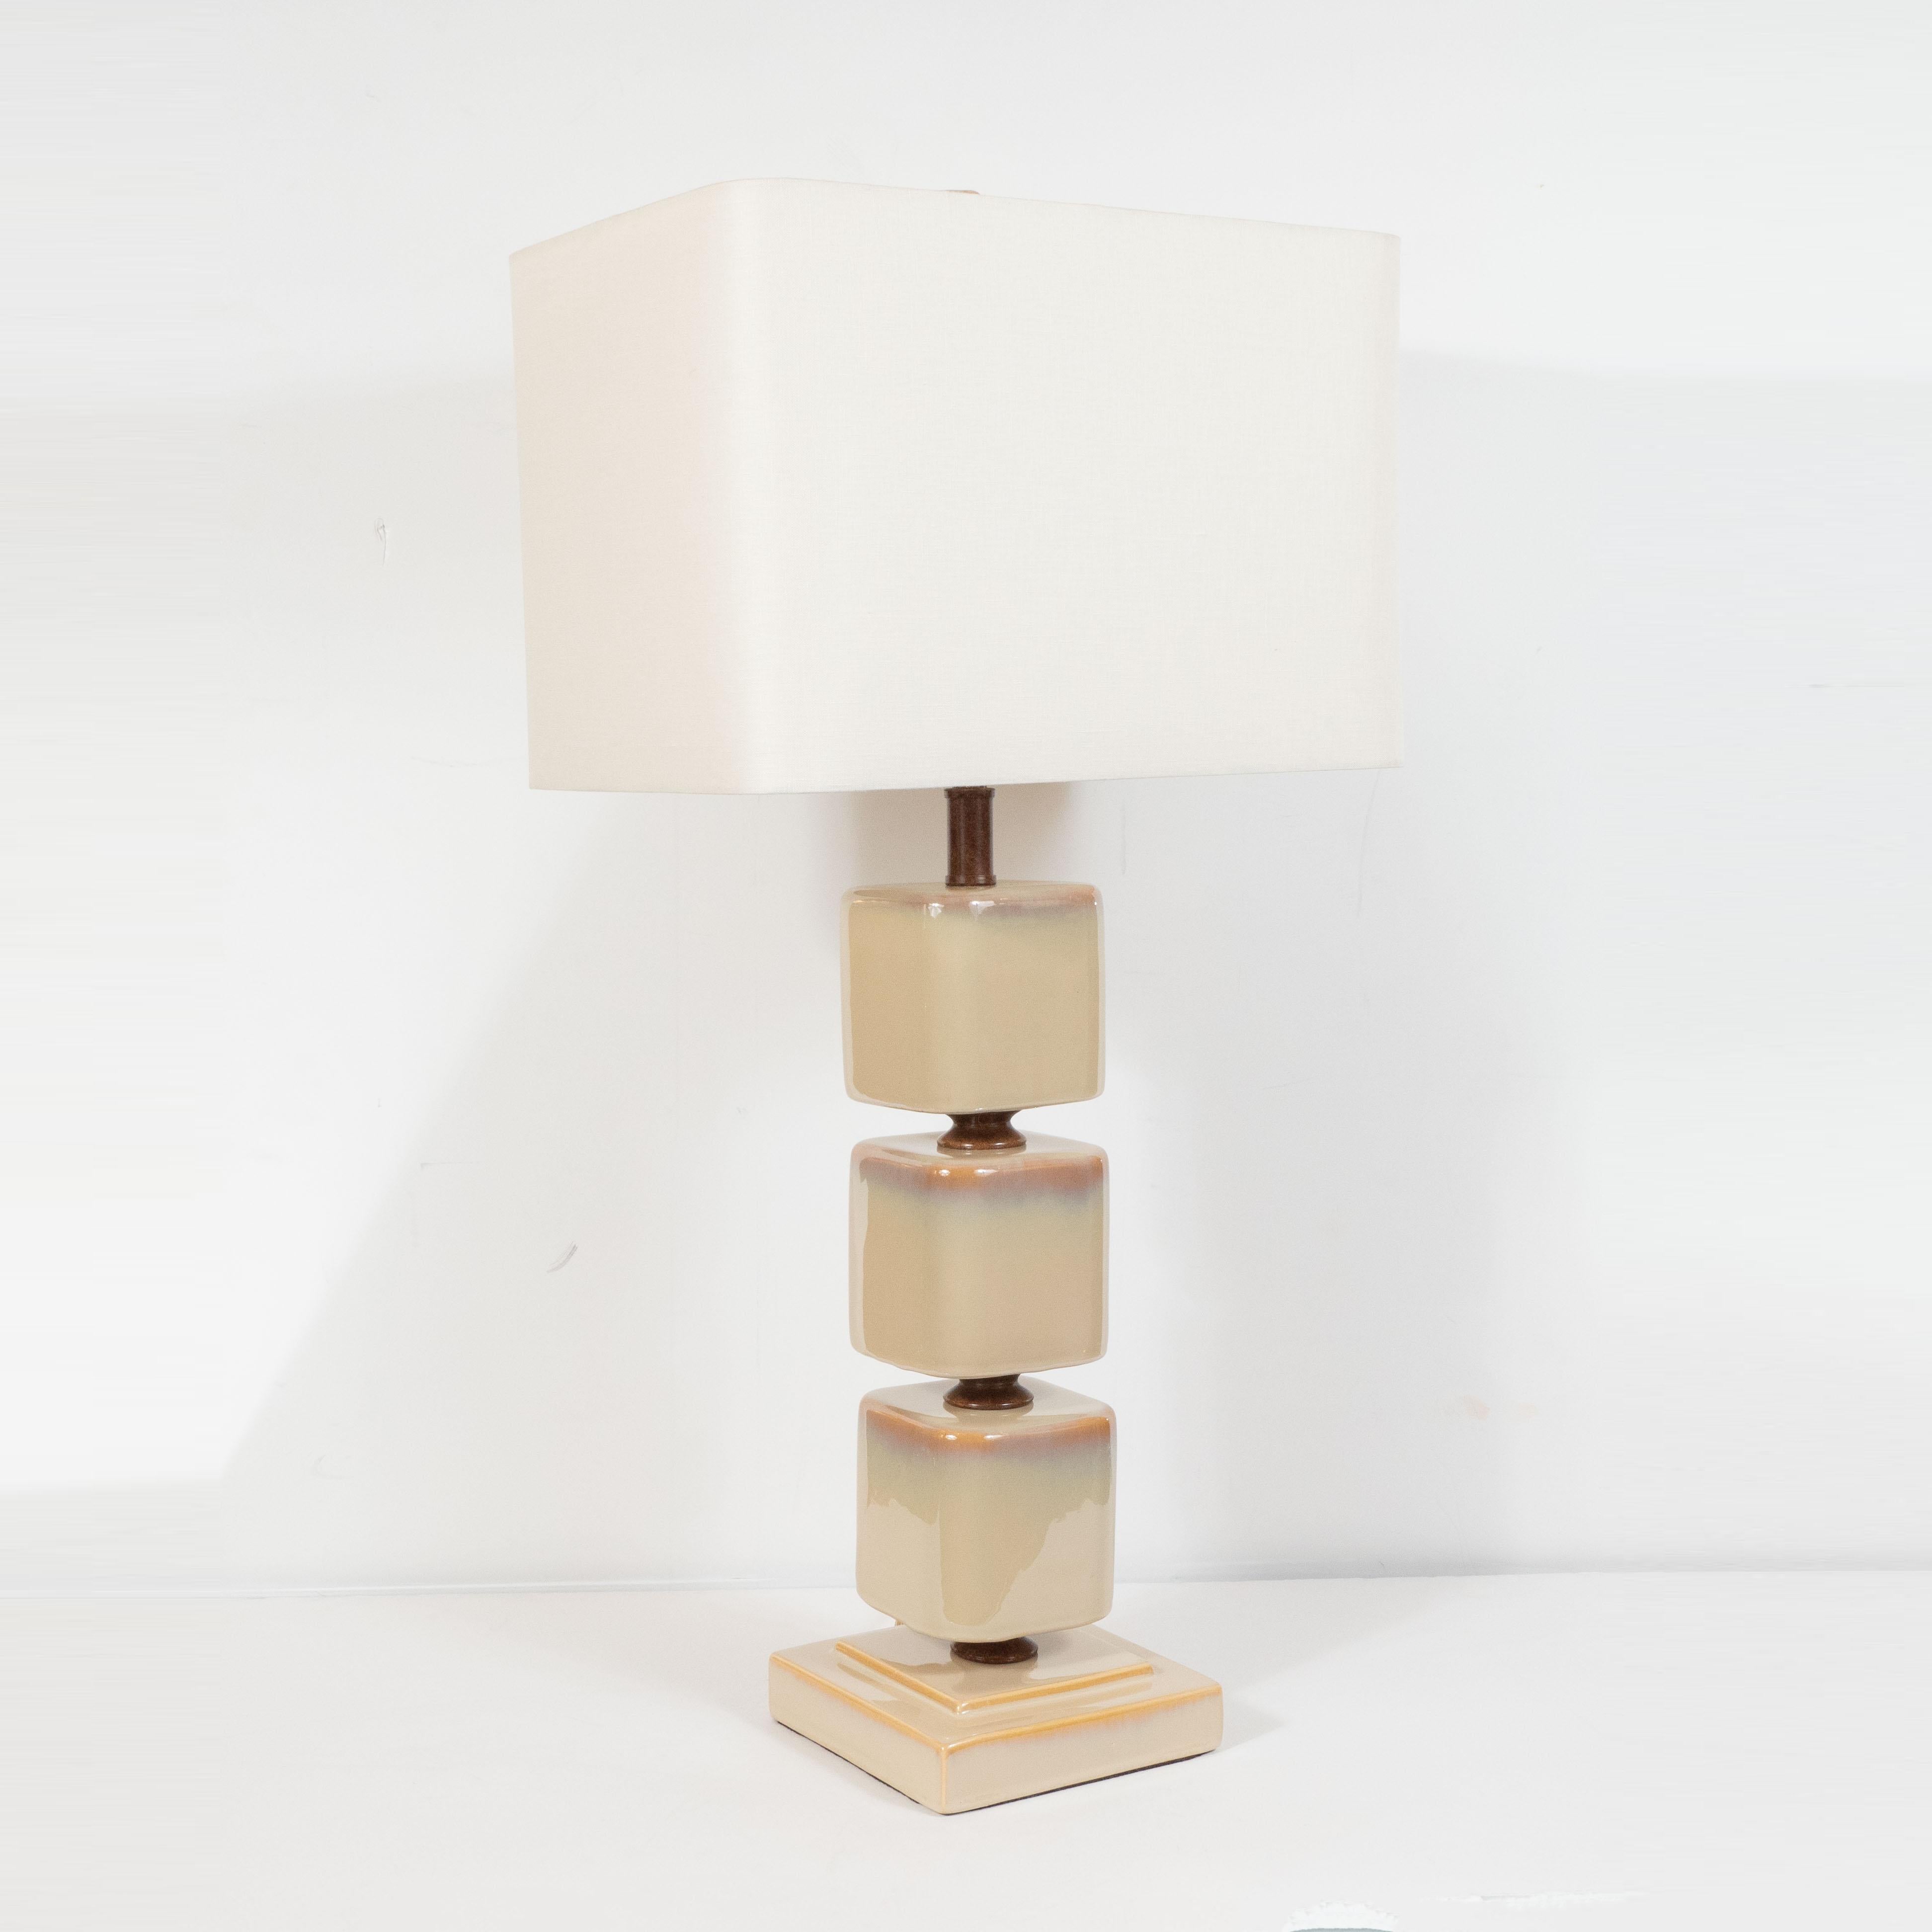 Mid-20th Century Pair of Mid-Century Modern Ceramic Pearlescent Cube Table Lamps